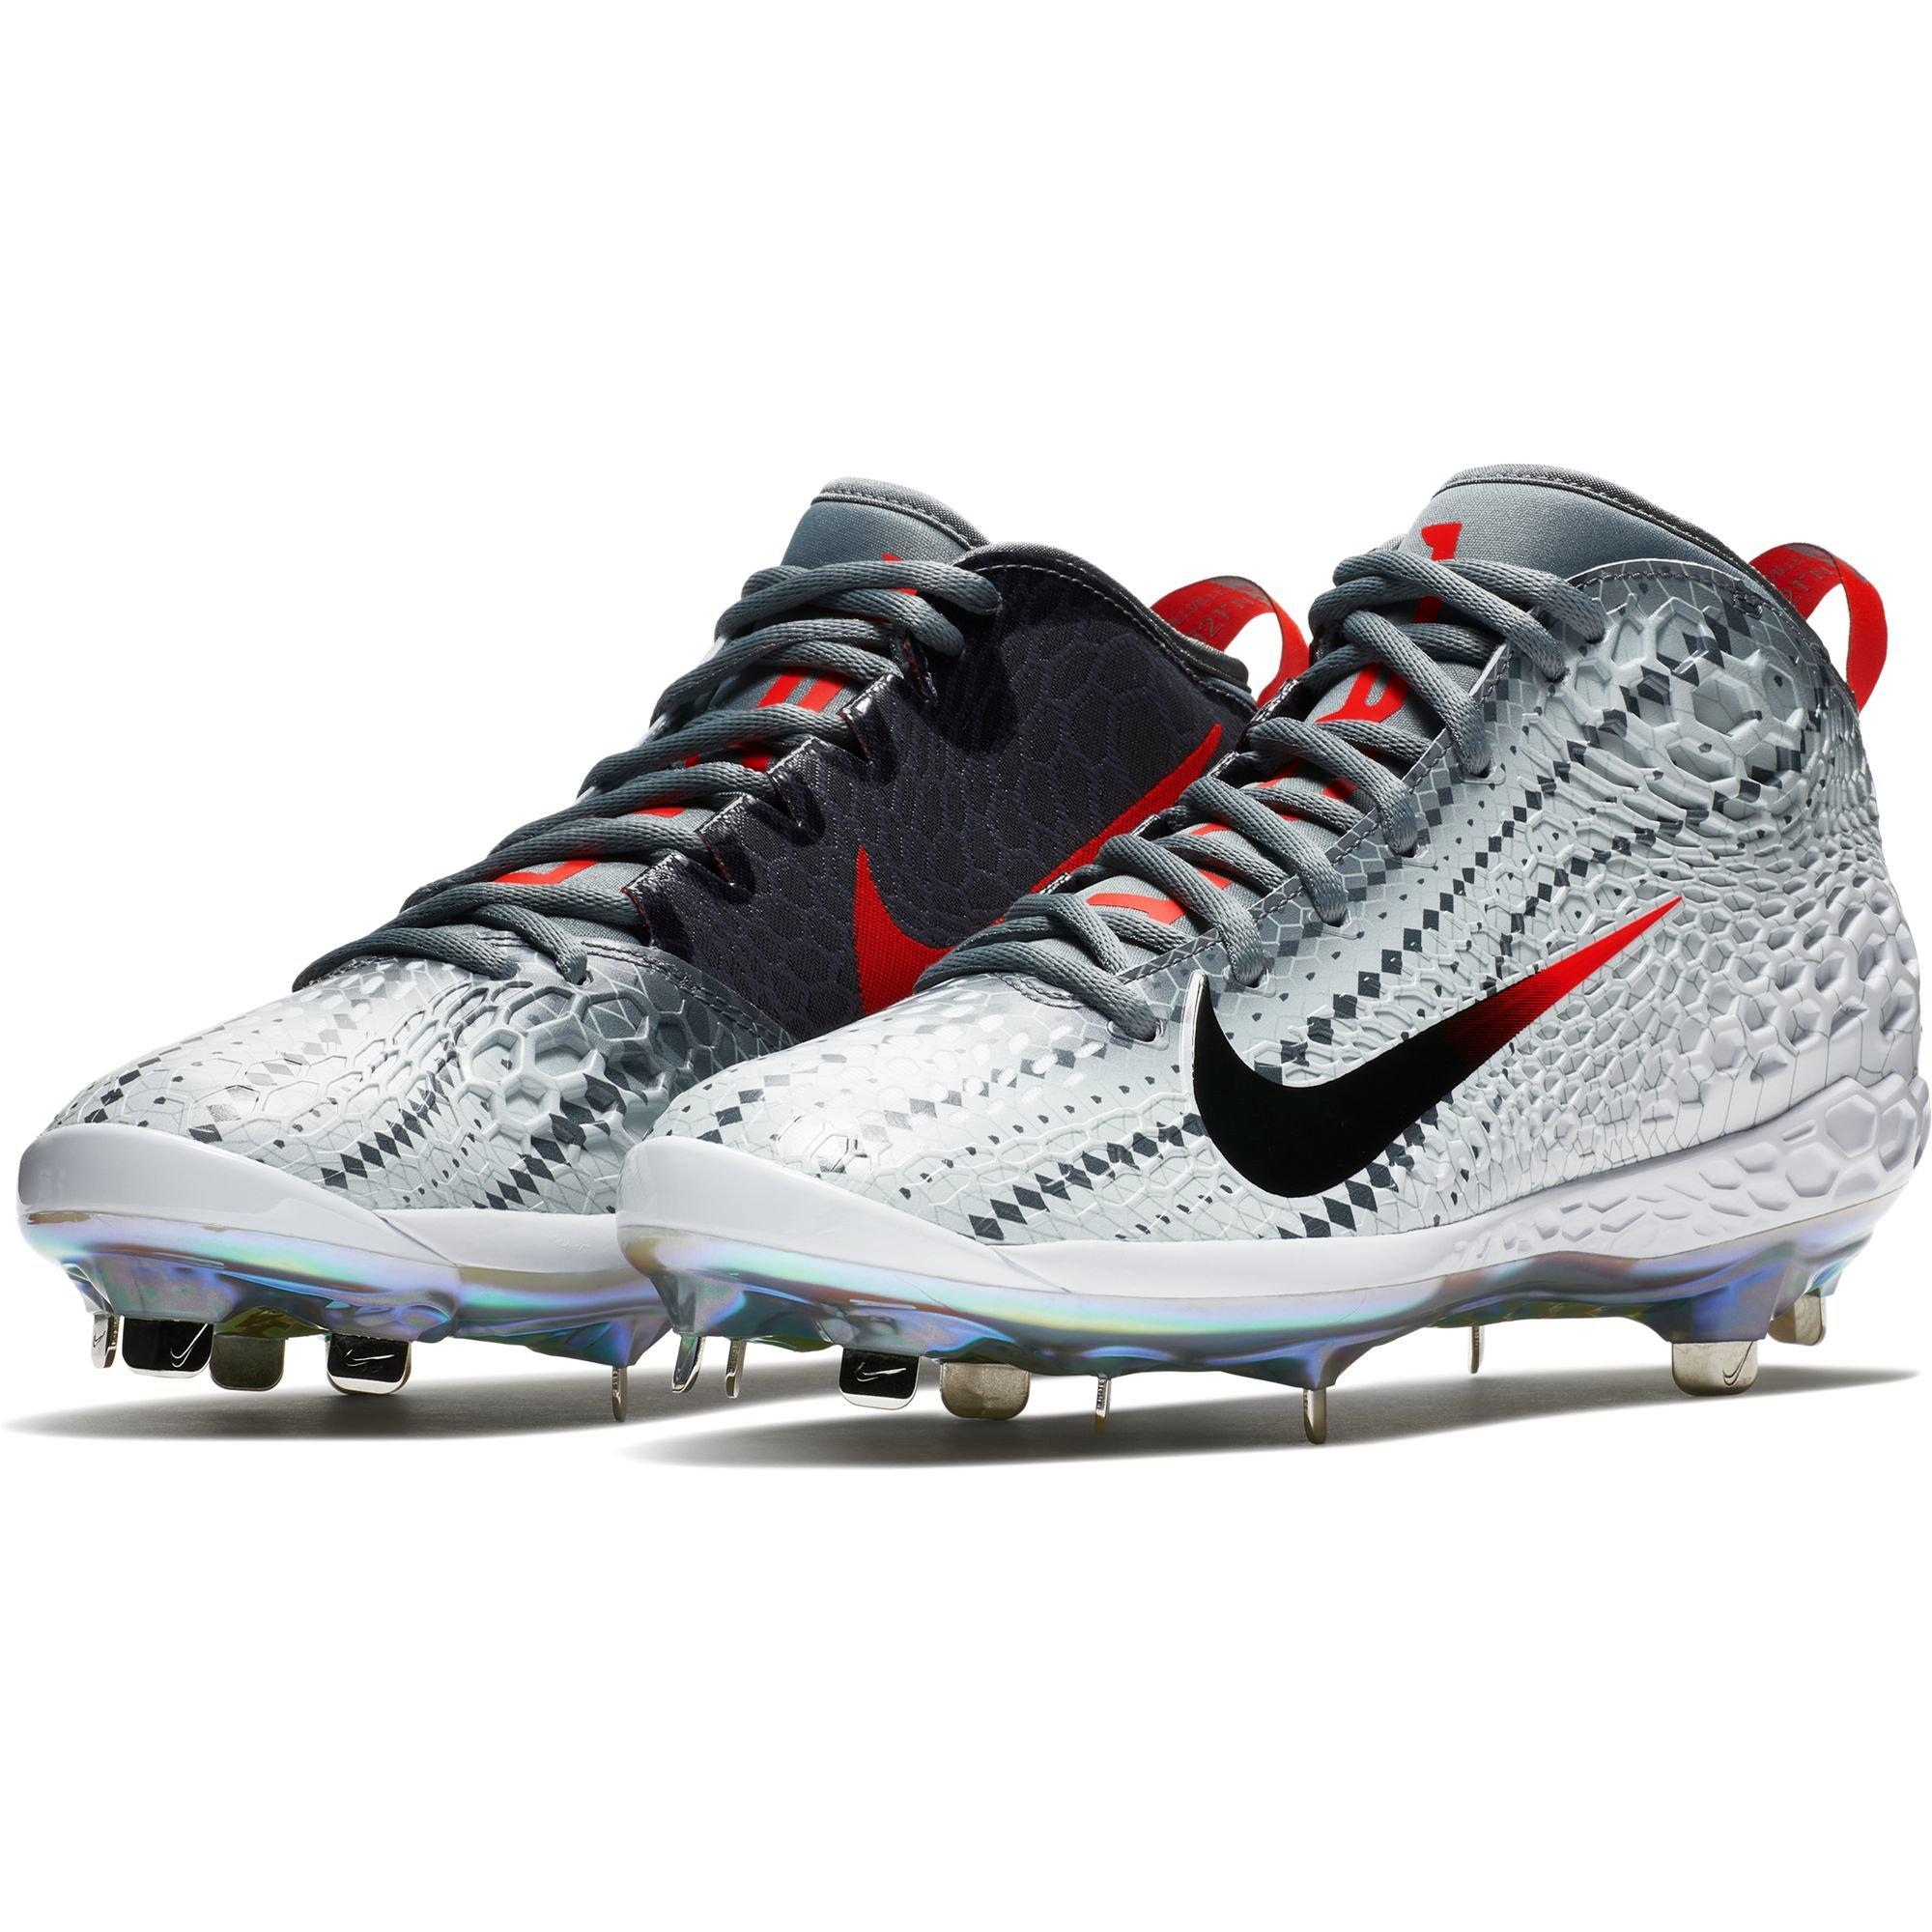 trout 5 molded cleats